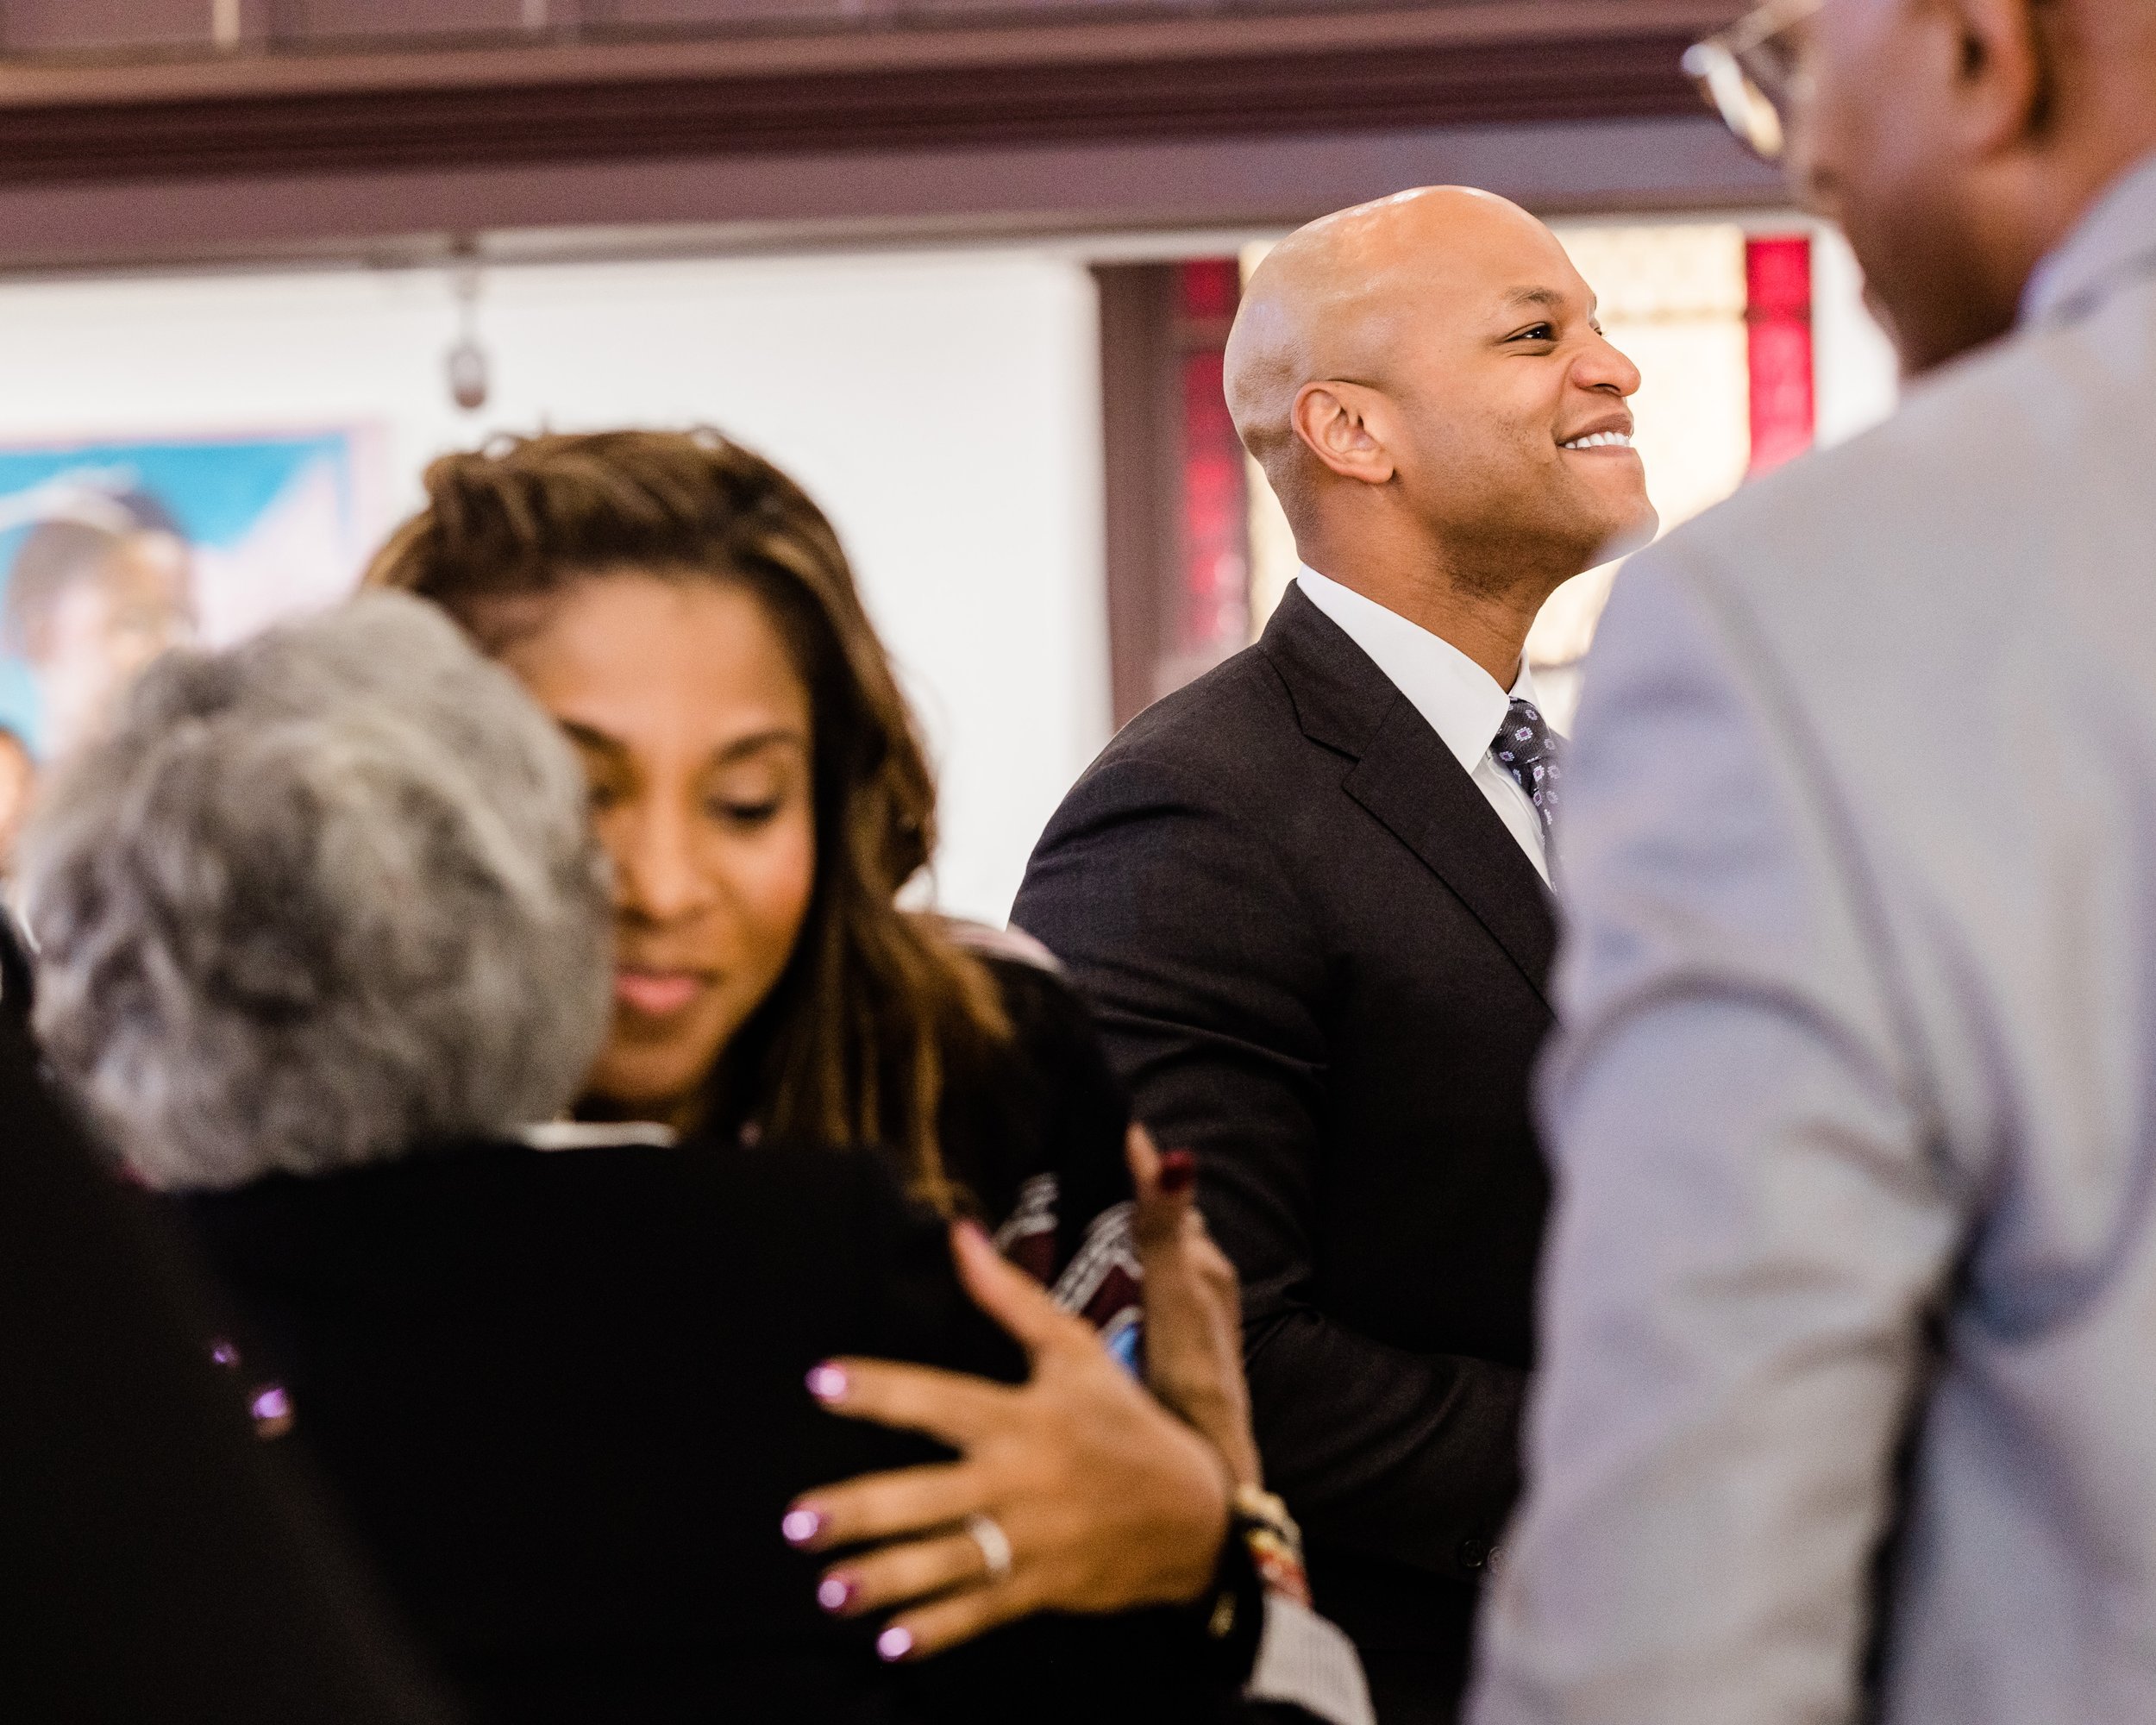 Governor Moore and First Lady Dawn Moore at Banneker-Douglass Museum by Megapixels Media Photography.jpeg